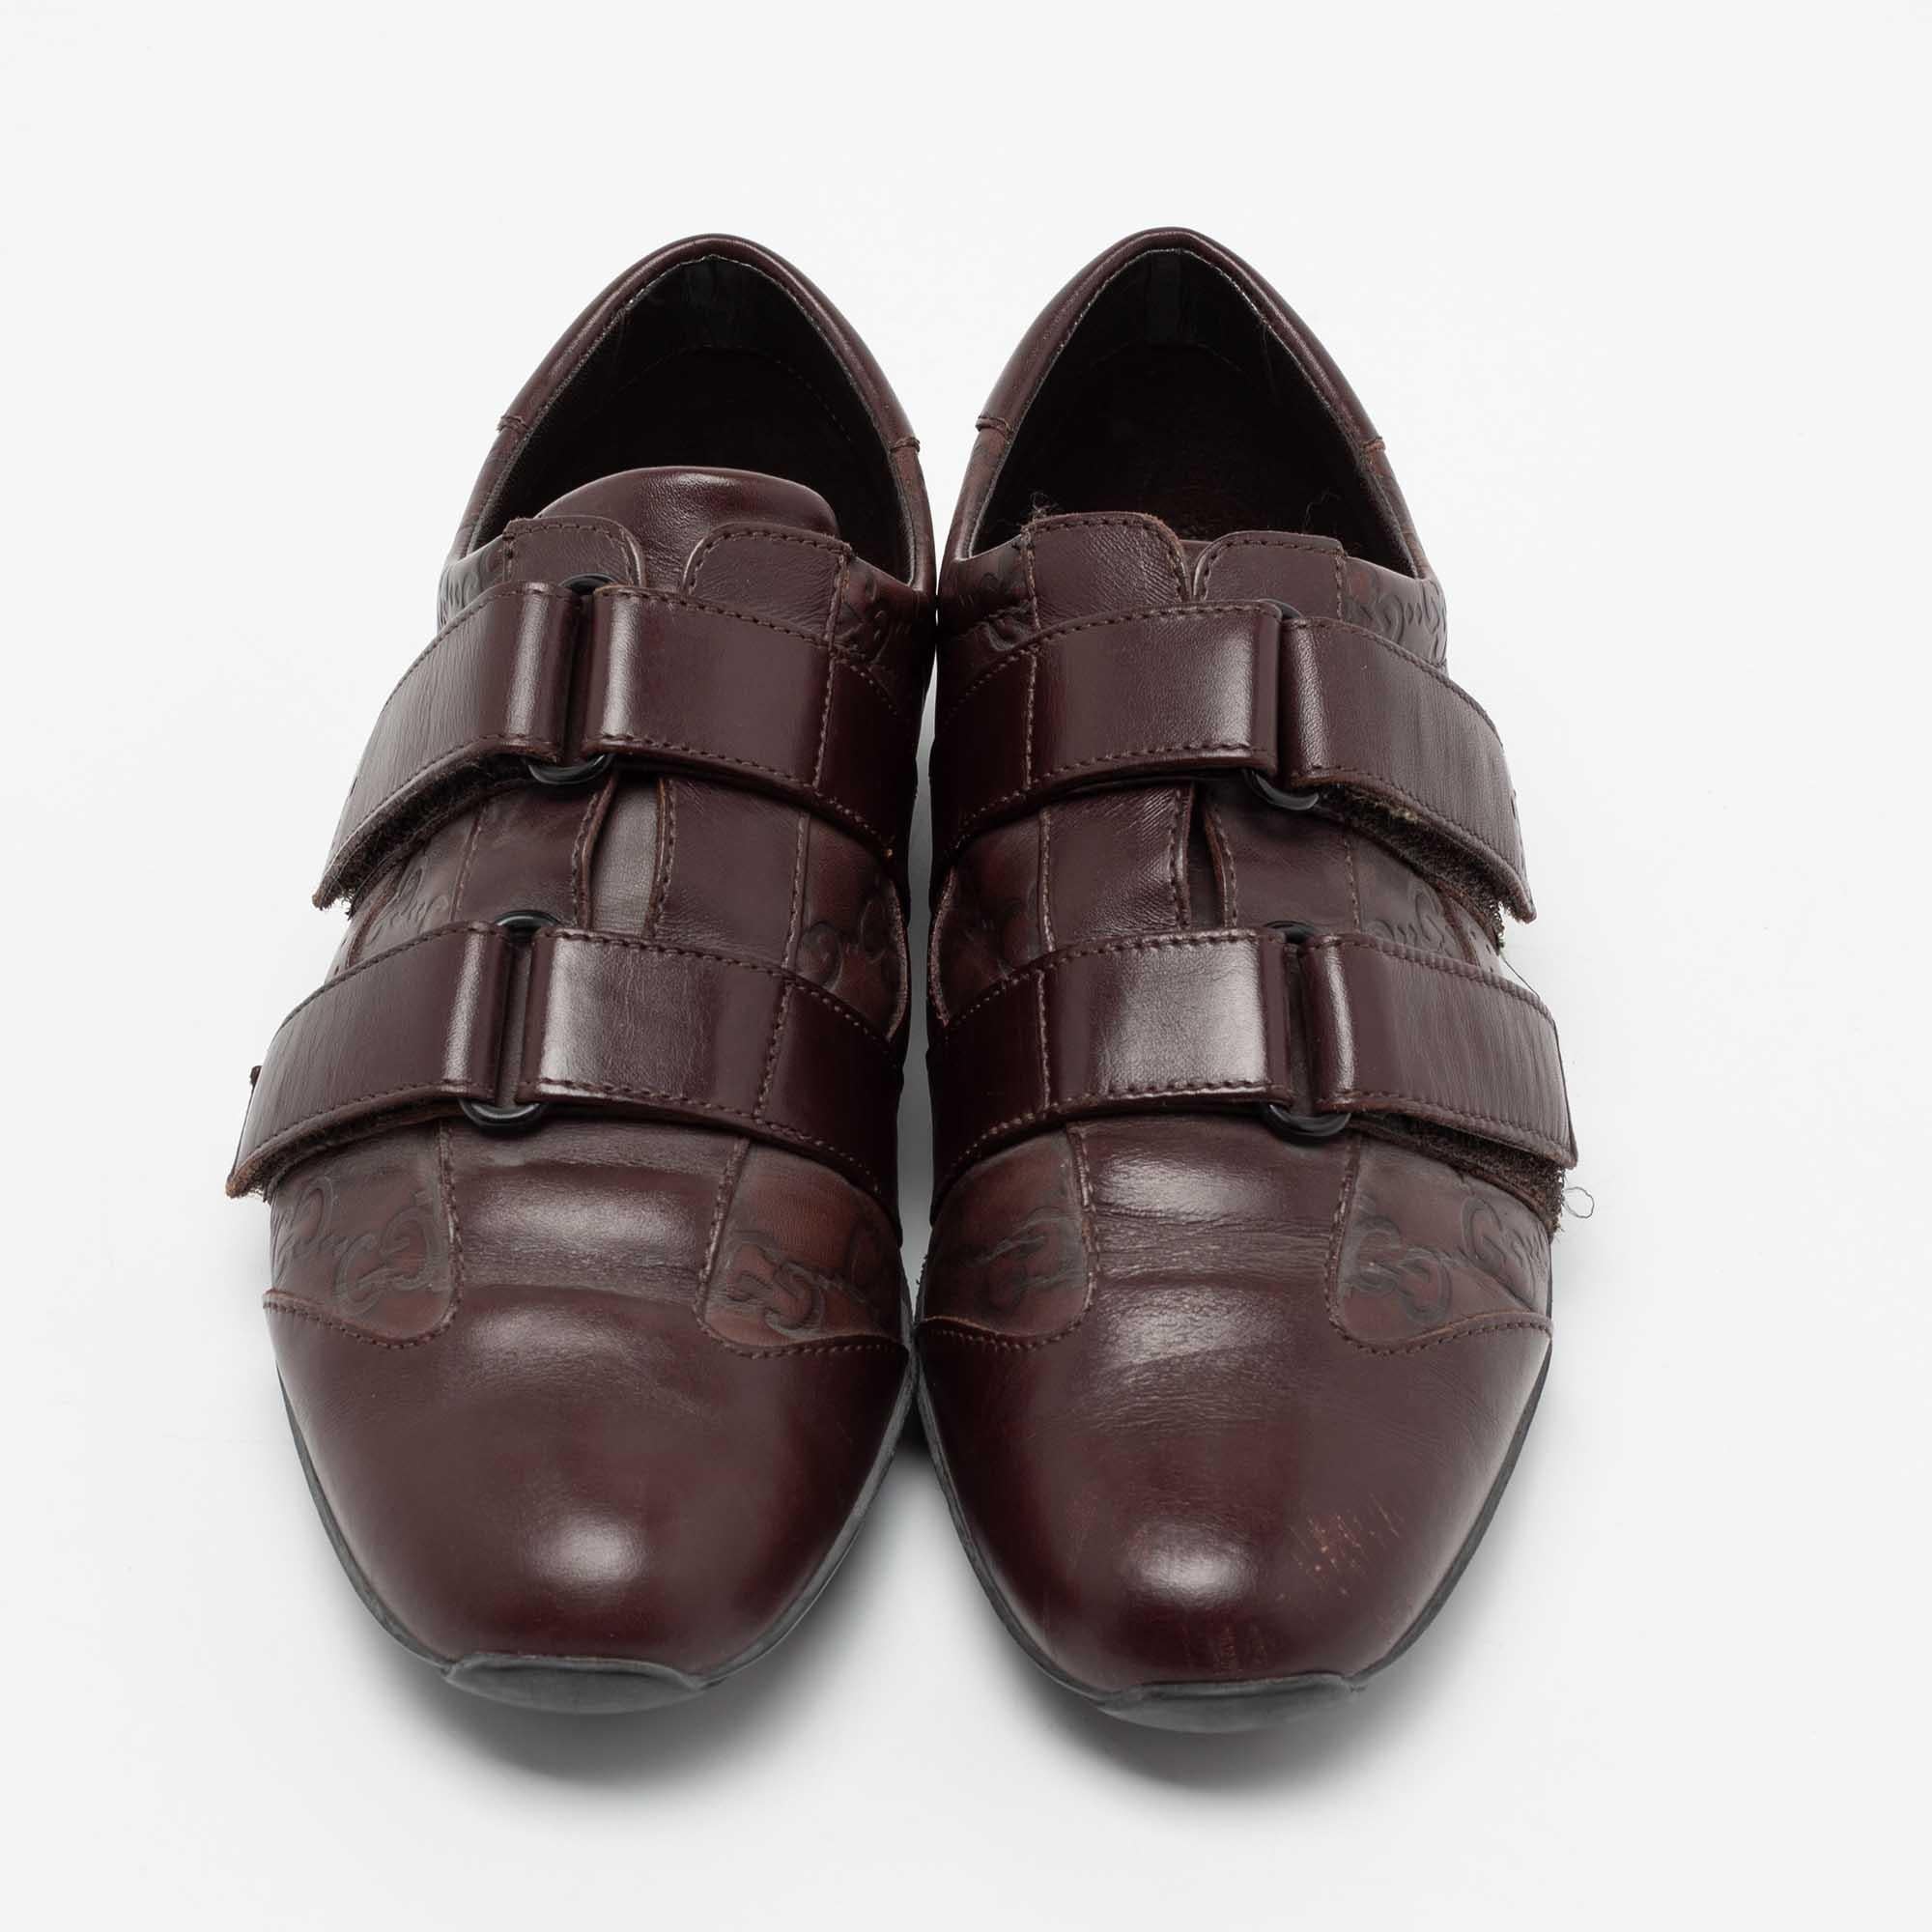 Gucci brings you these sneakers that are super sturdy, stunning, and stylish. They are crafted from burgundy Guccissima leather on the exterior. They are highlighted with velcro strap closures and matching hardware on the vamps. Add these trendy